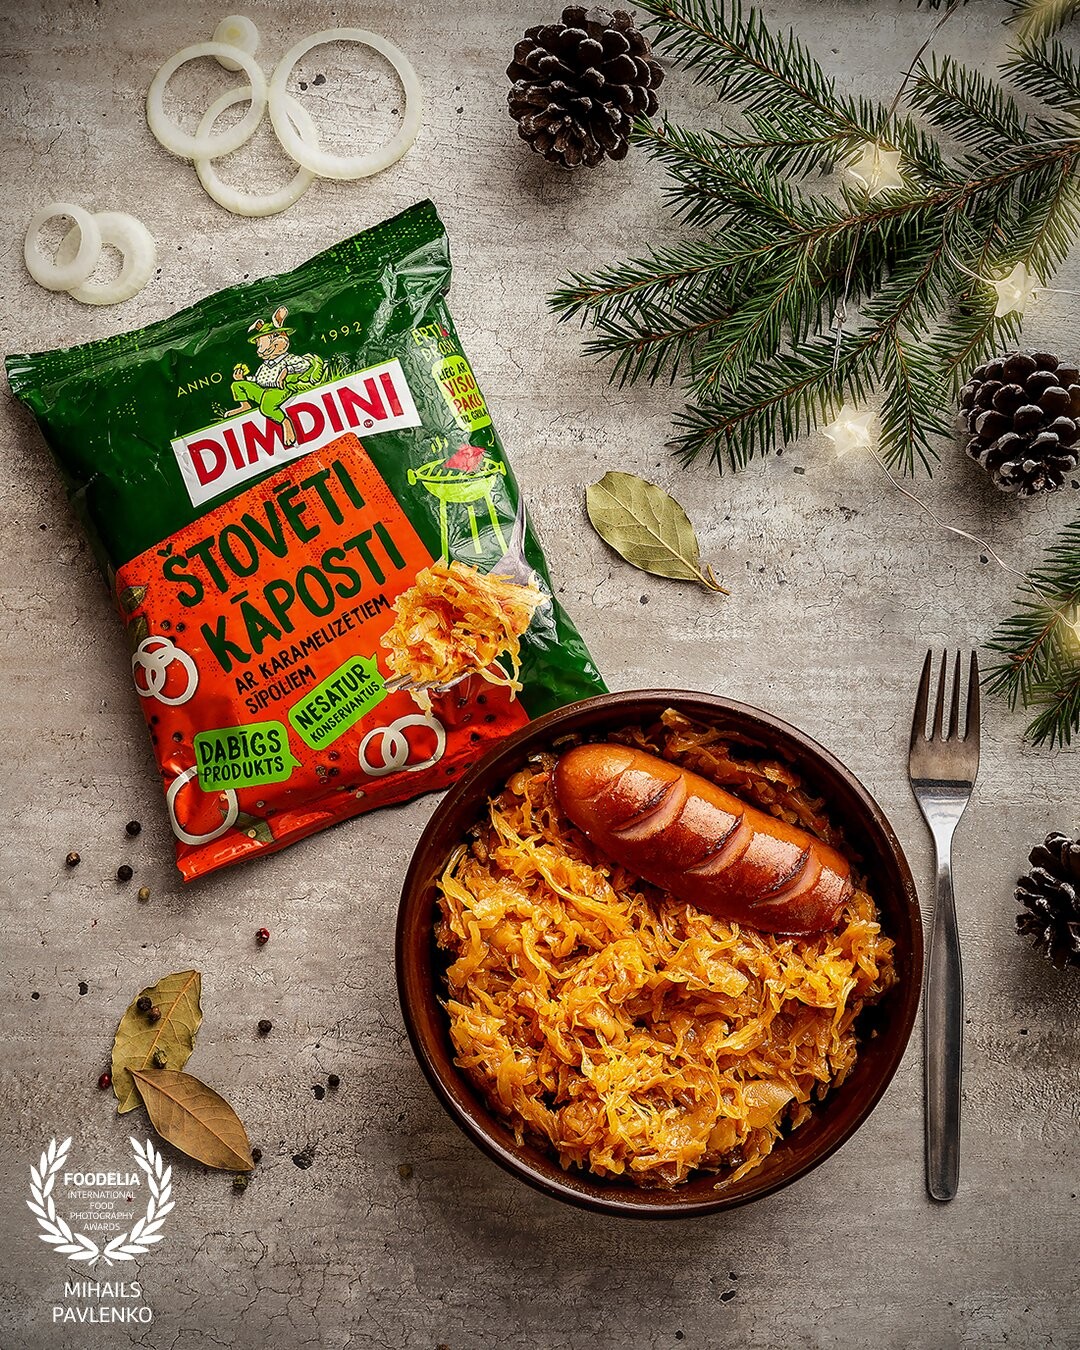 Stewed cabbage. Do you know the useful properties? Stewed cabbage is a traditional Latvian Christmas meal.<br />
Product photo shoot for Dimdini , local Latvian producer @dimdini_